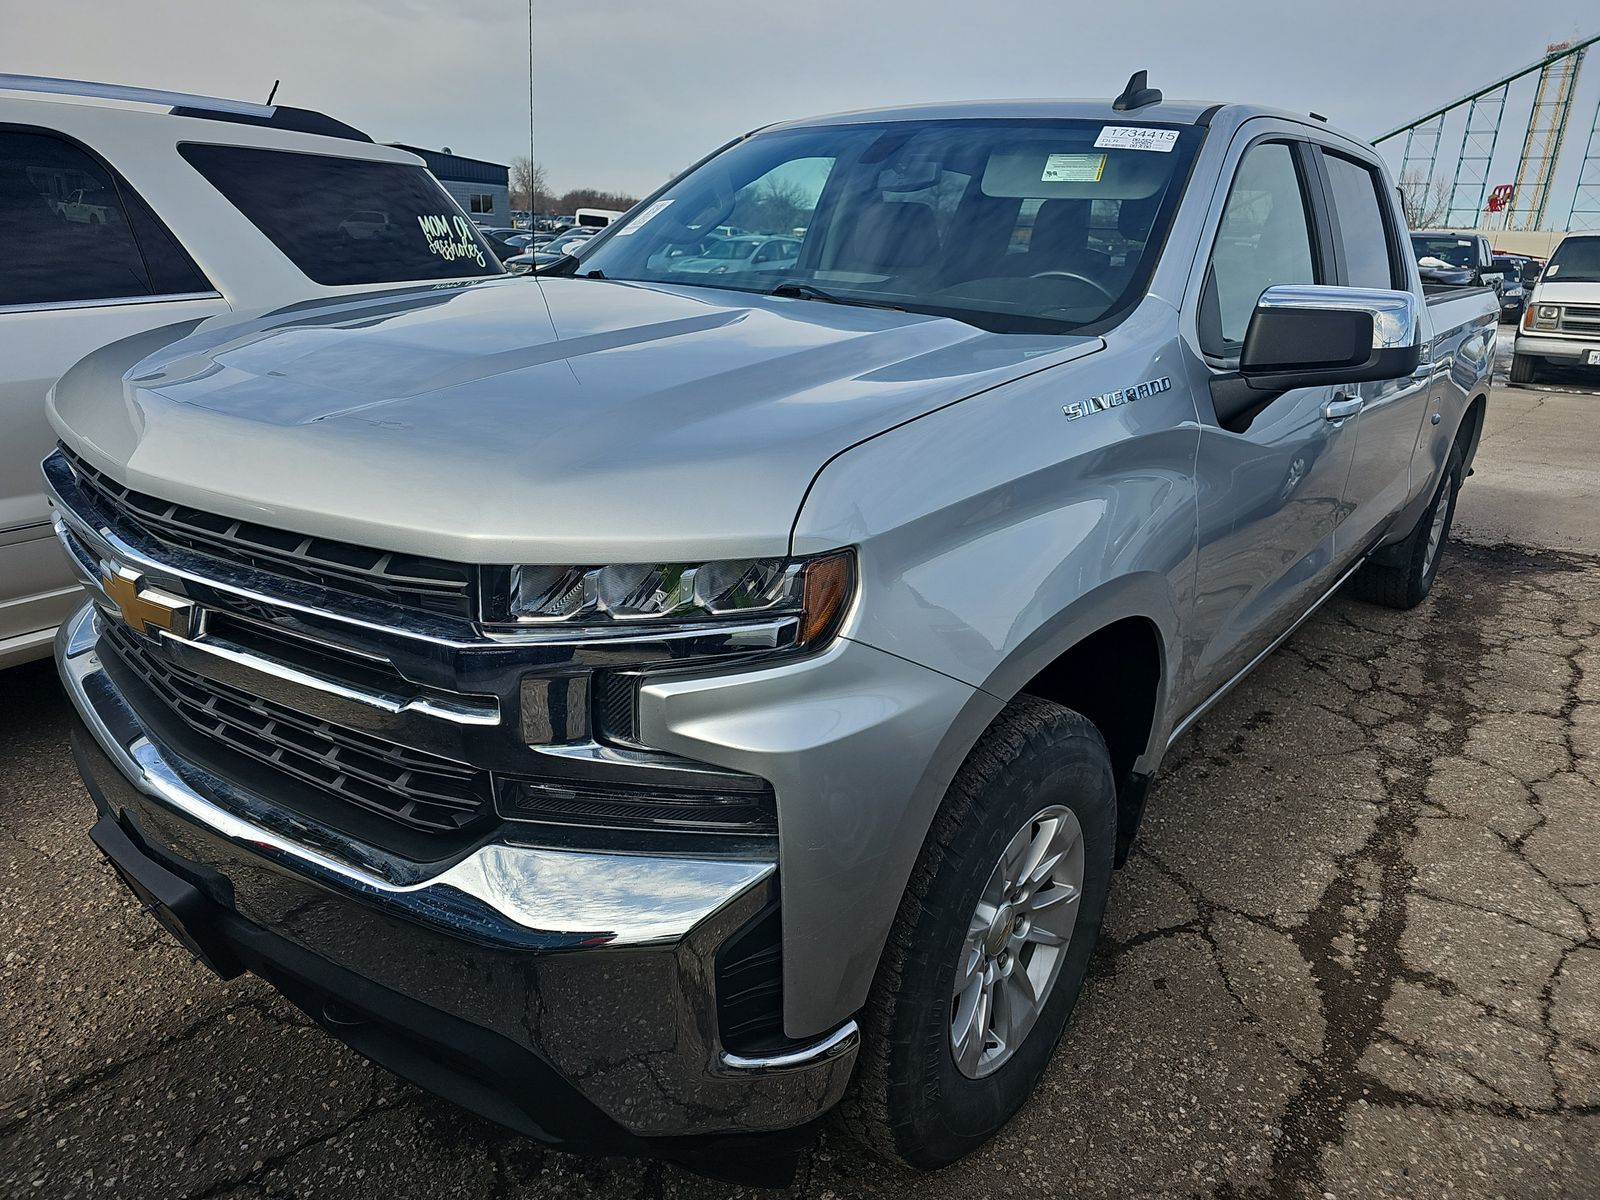 Used 2021 Chevrolet Silverado 1500 LT with VIN 1GCUYDEDXMZ259612 for sale in Minneapolis, Minnesota